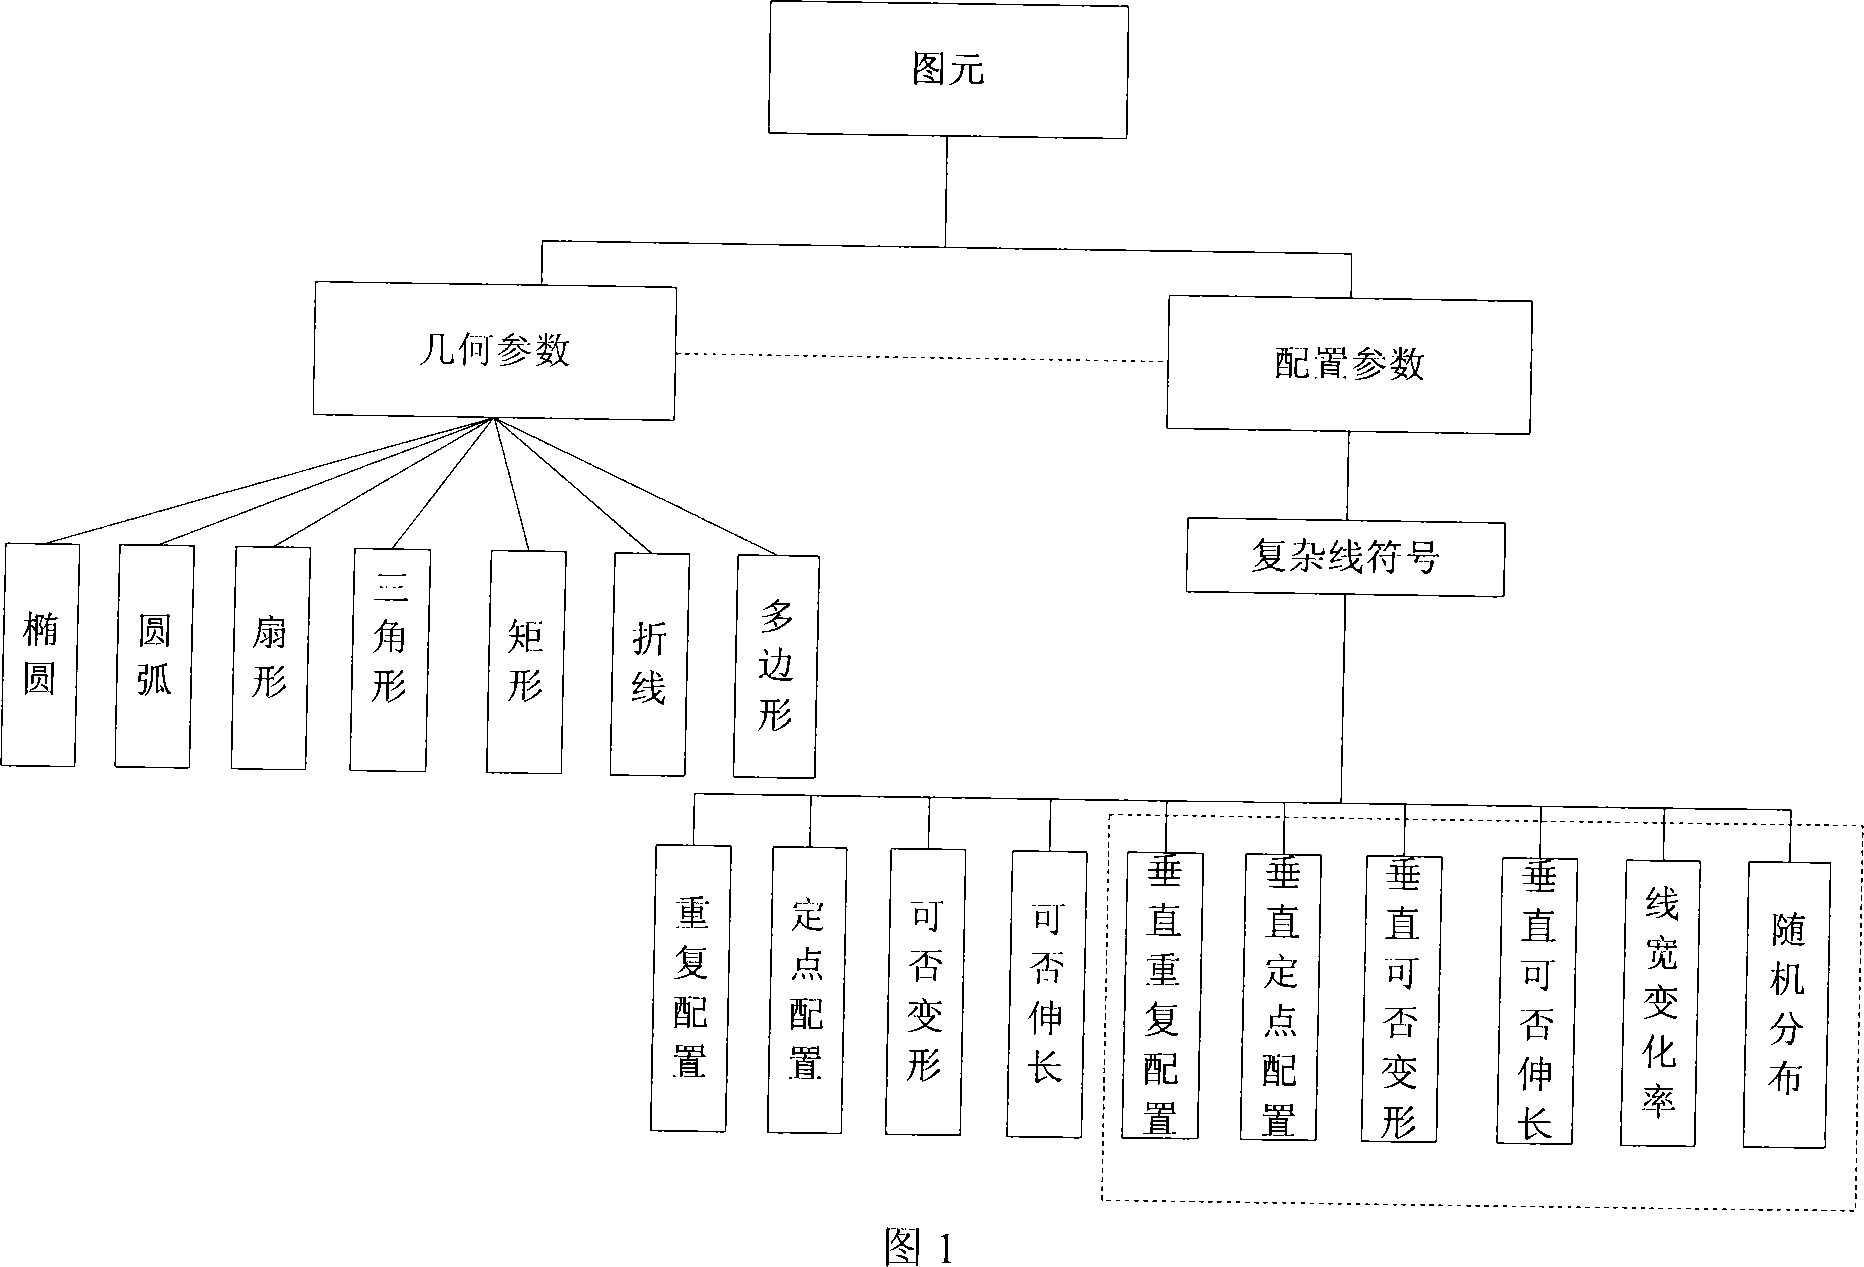 Computer automatic drafting method of complicated map symbol